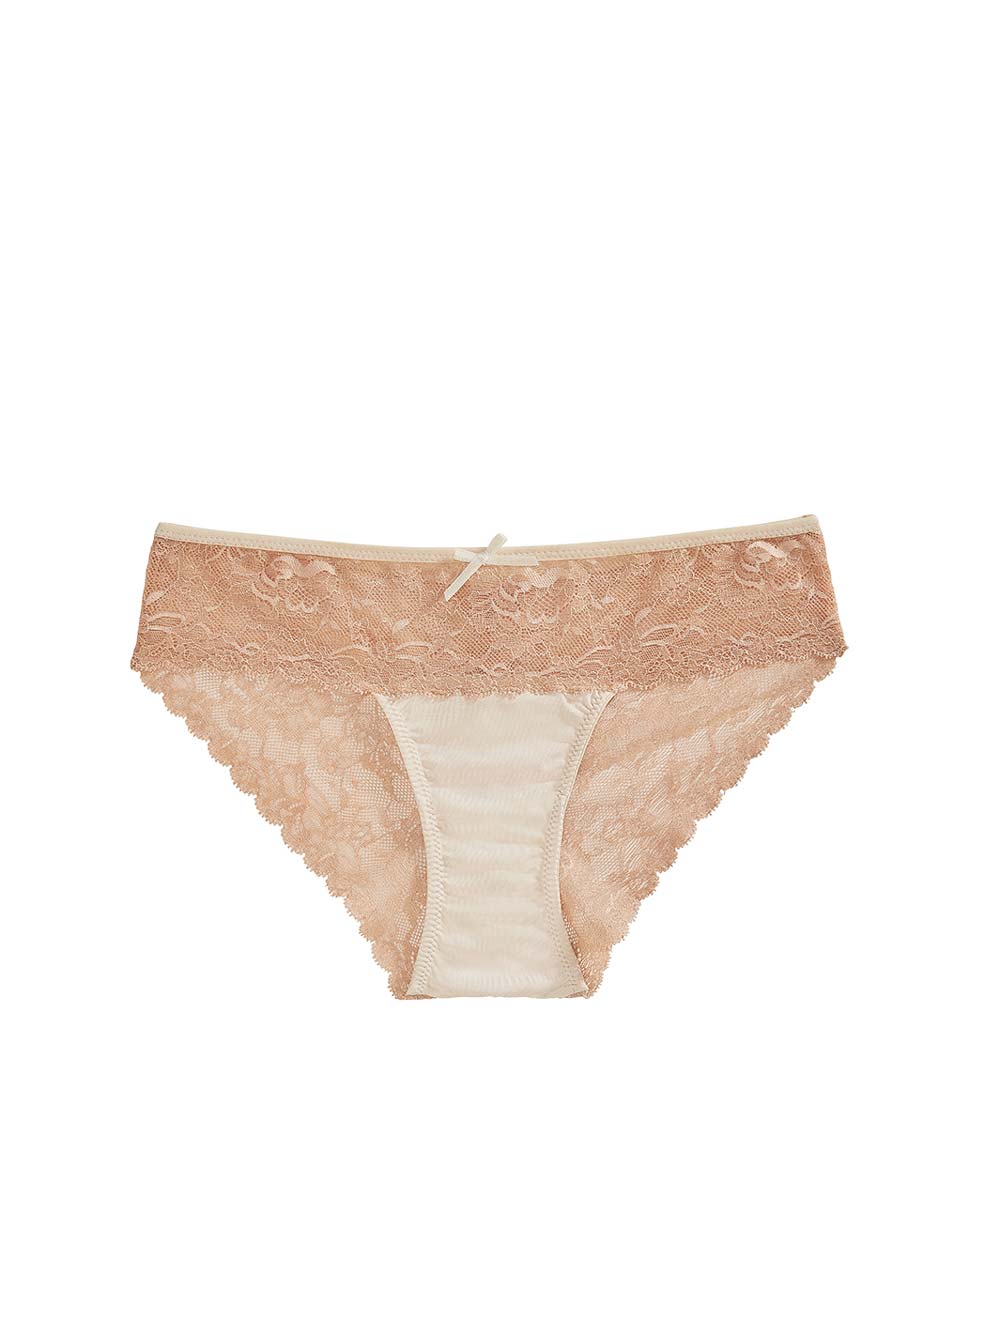 Kymber Cotton Front Lace Detailing Panty